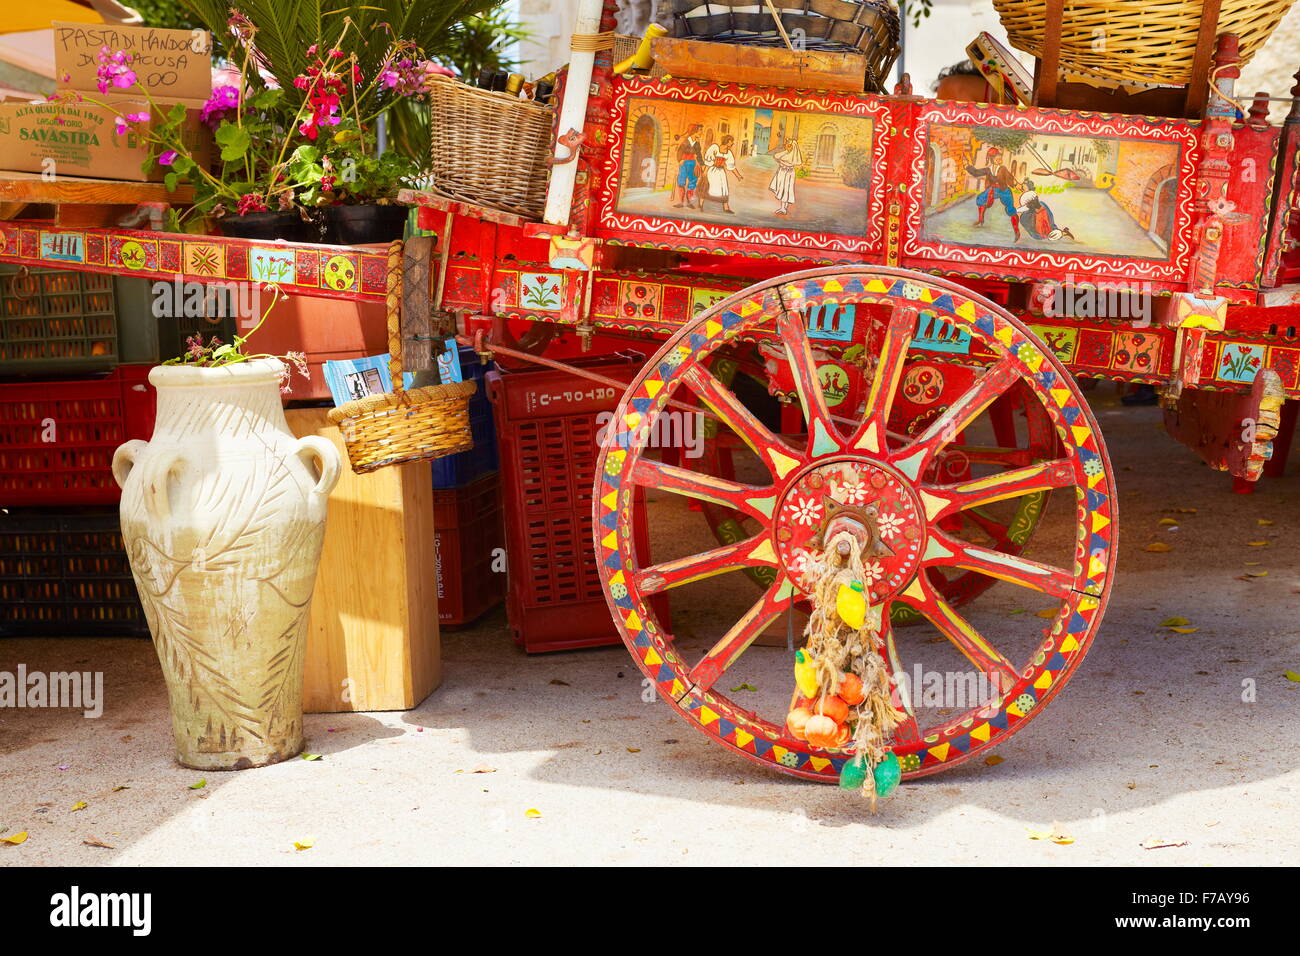 Colorful decorated cart, traditional Sicilian rural horse-drawn carriage, street decoration, Sicily Island, Italy Stock Photo